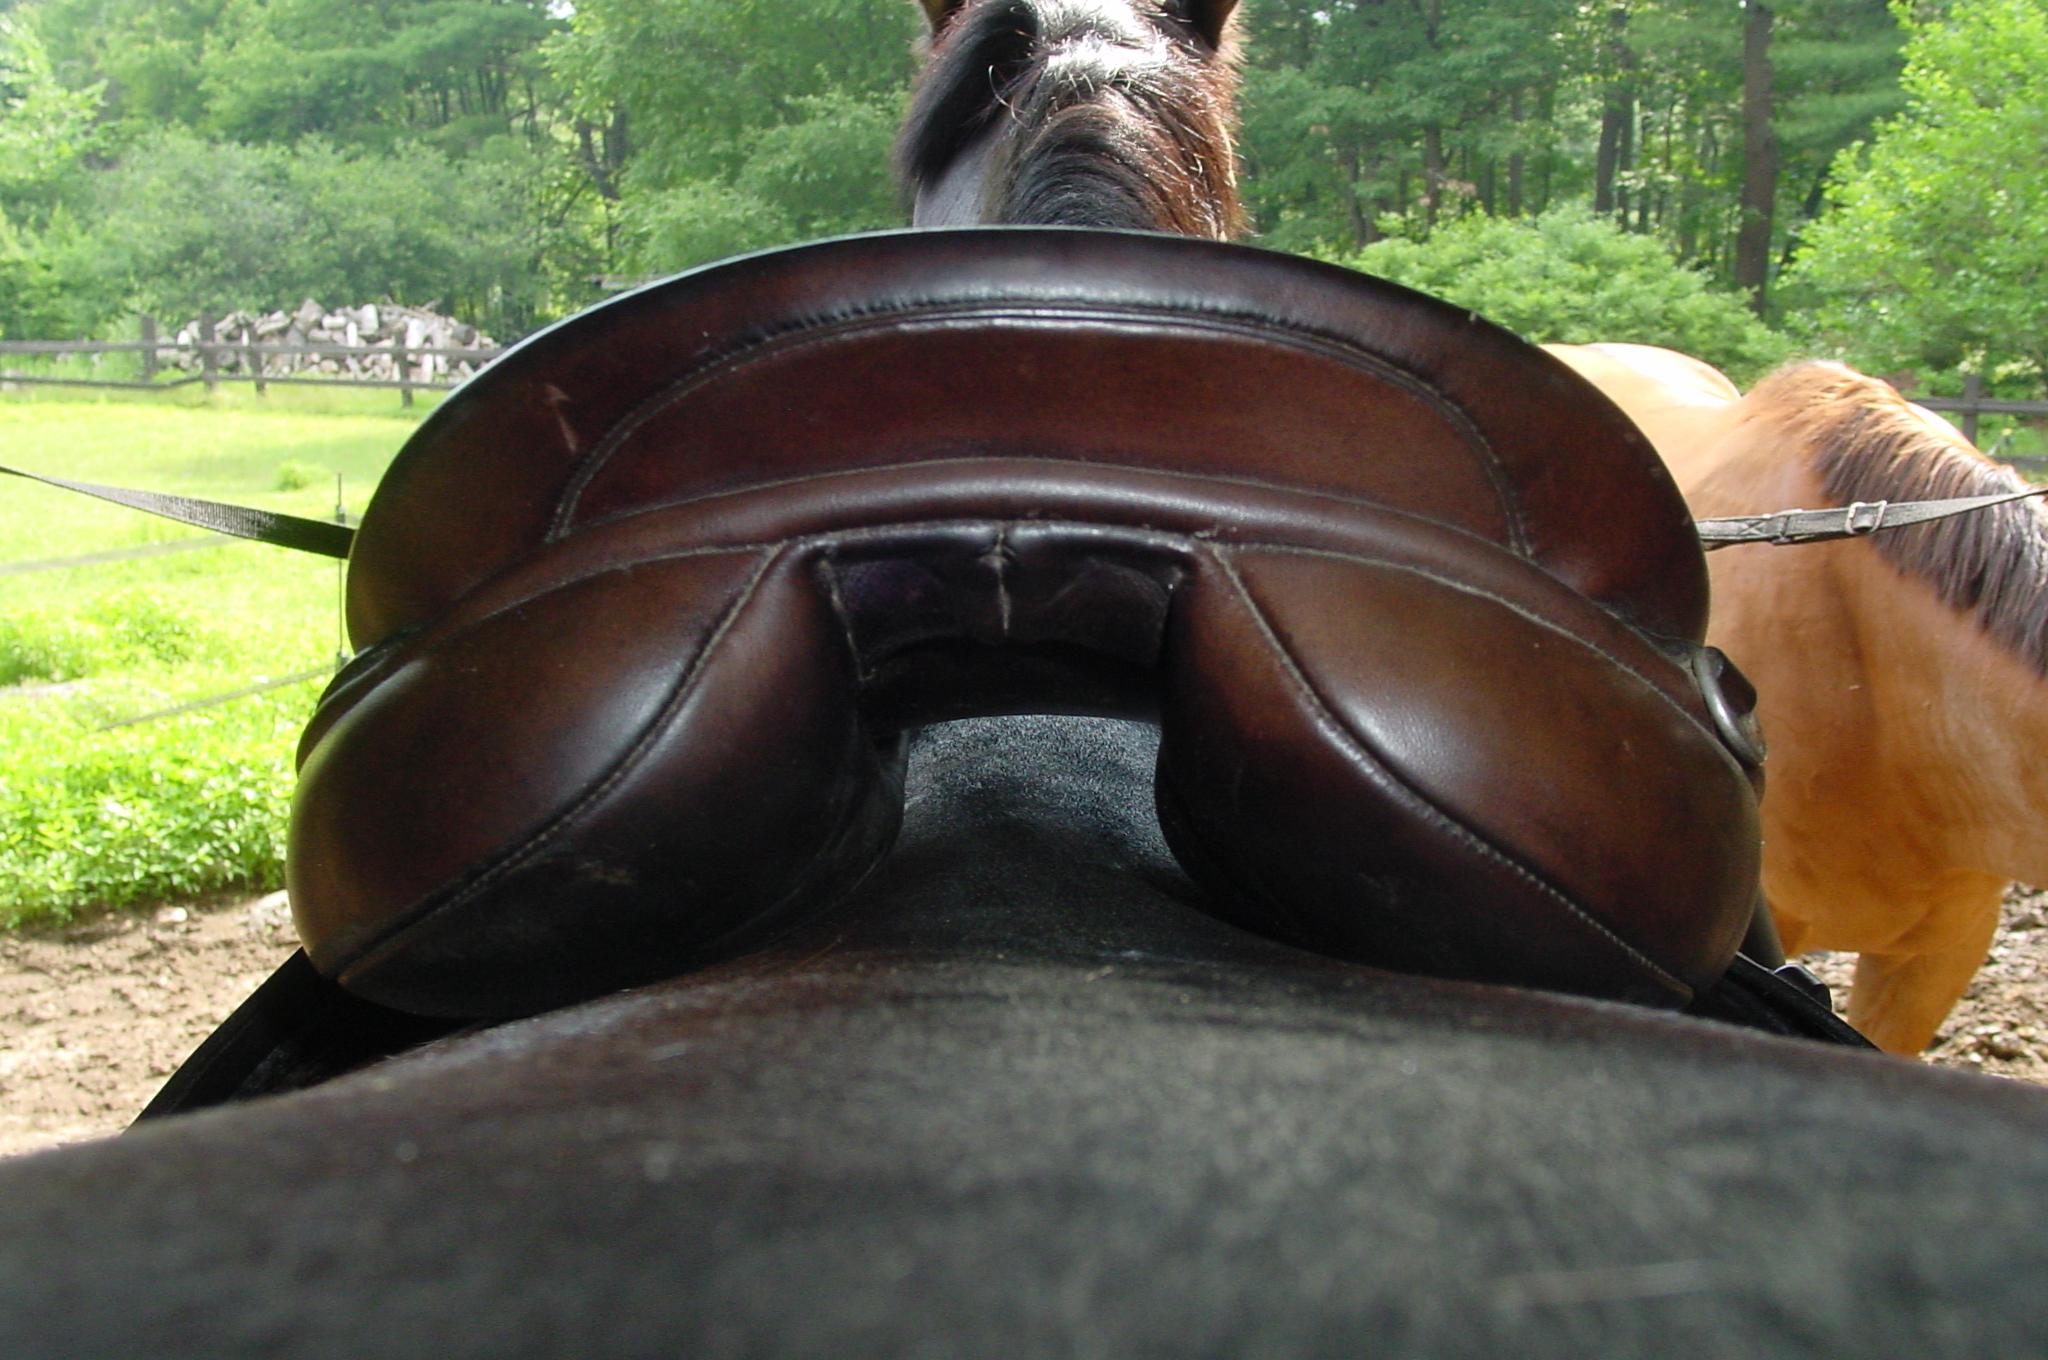 What are some tips for properly fitting a western saddle?